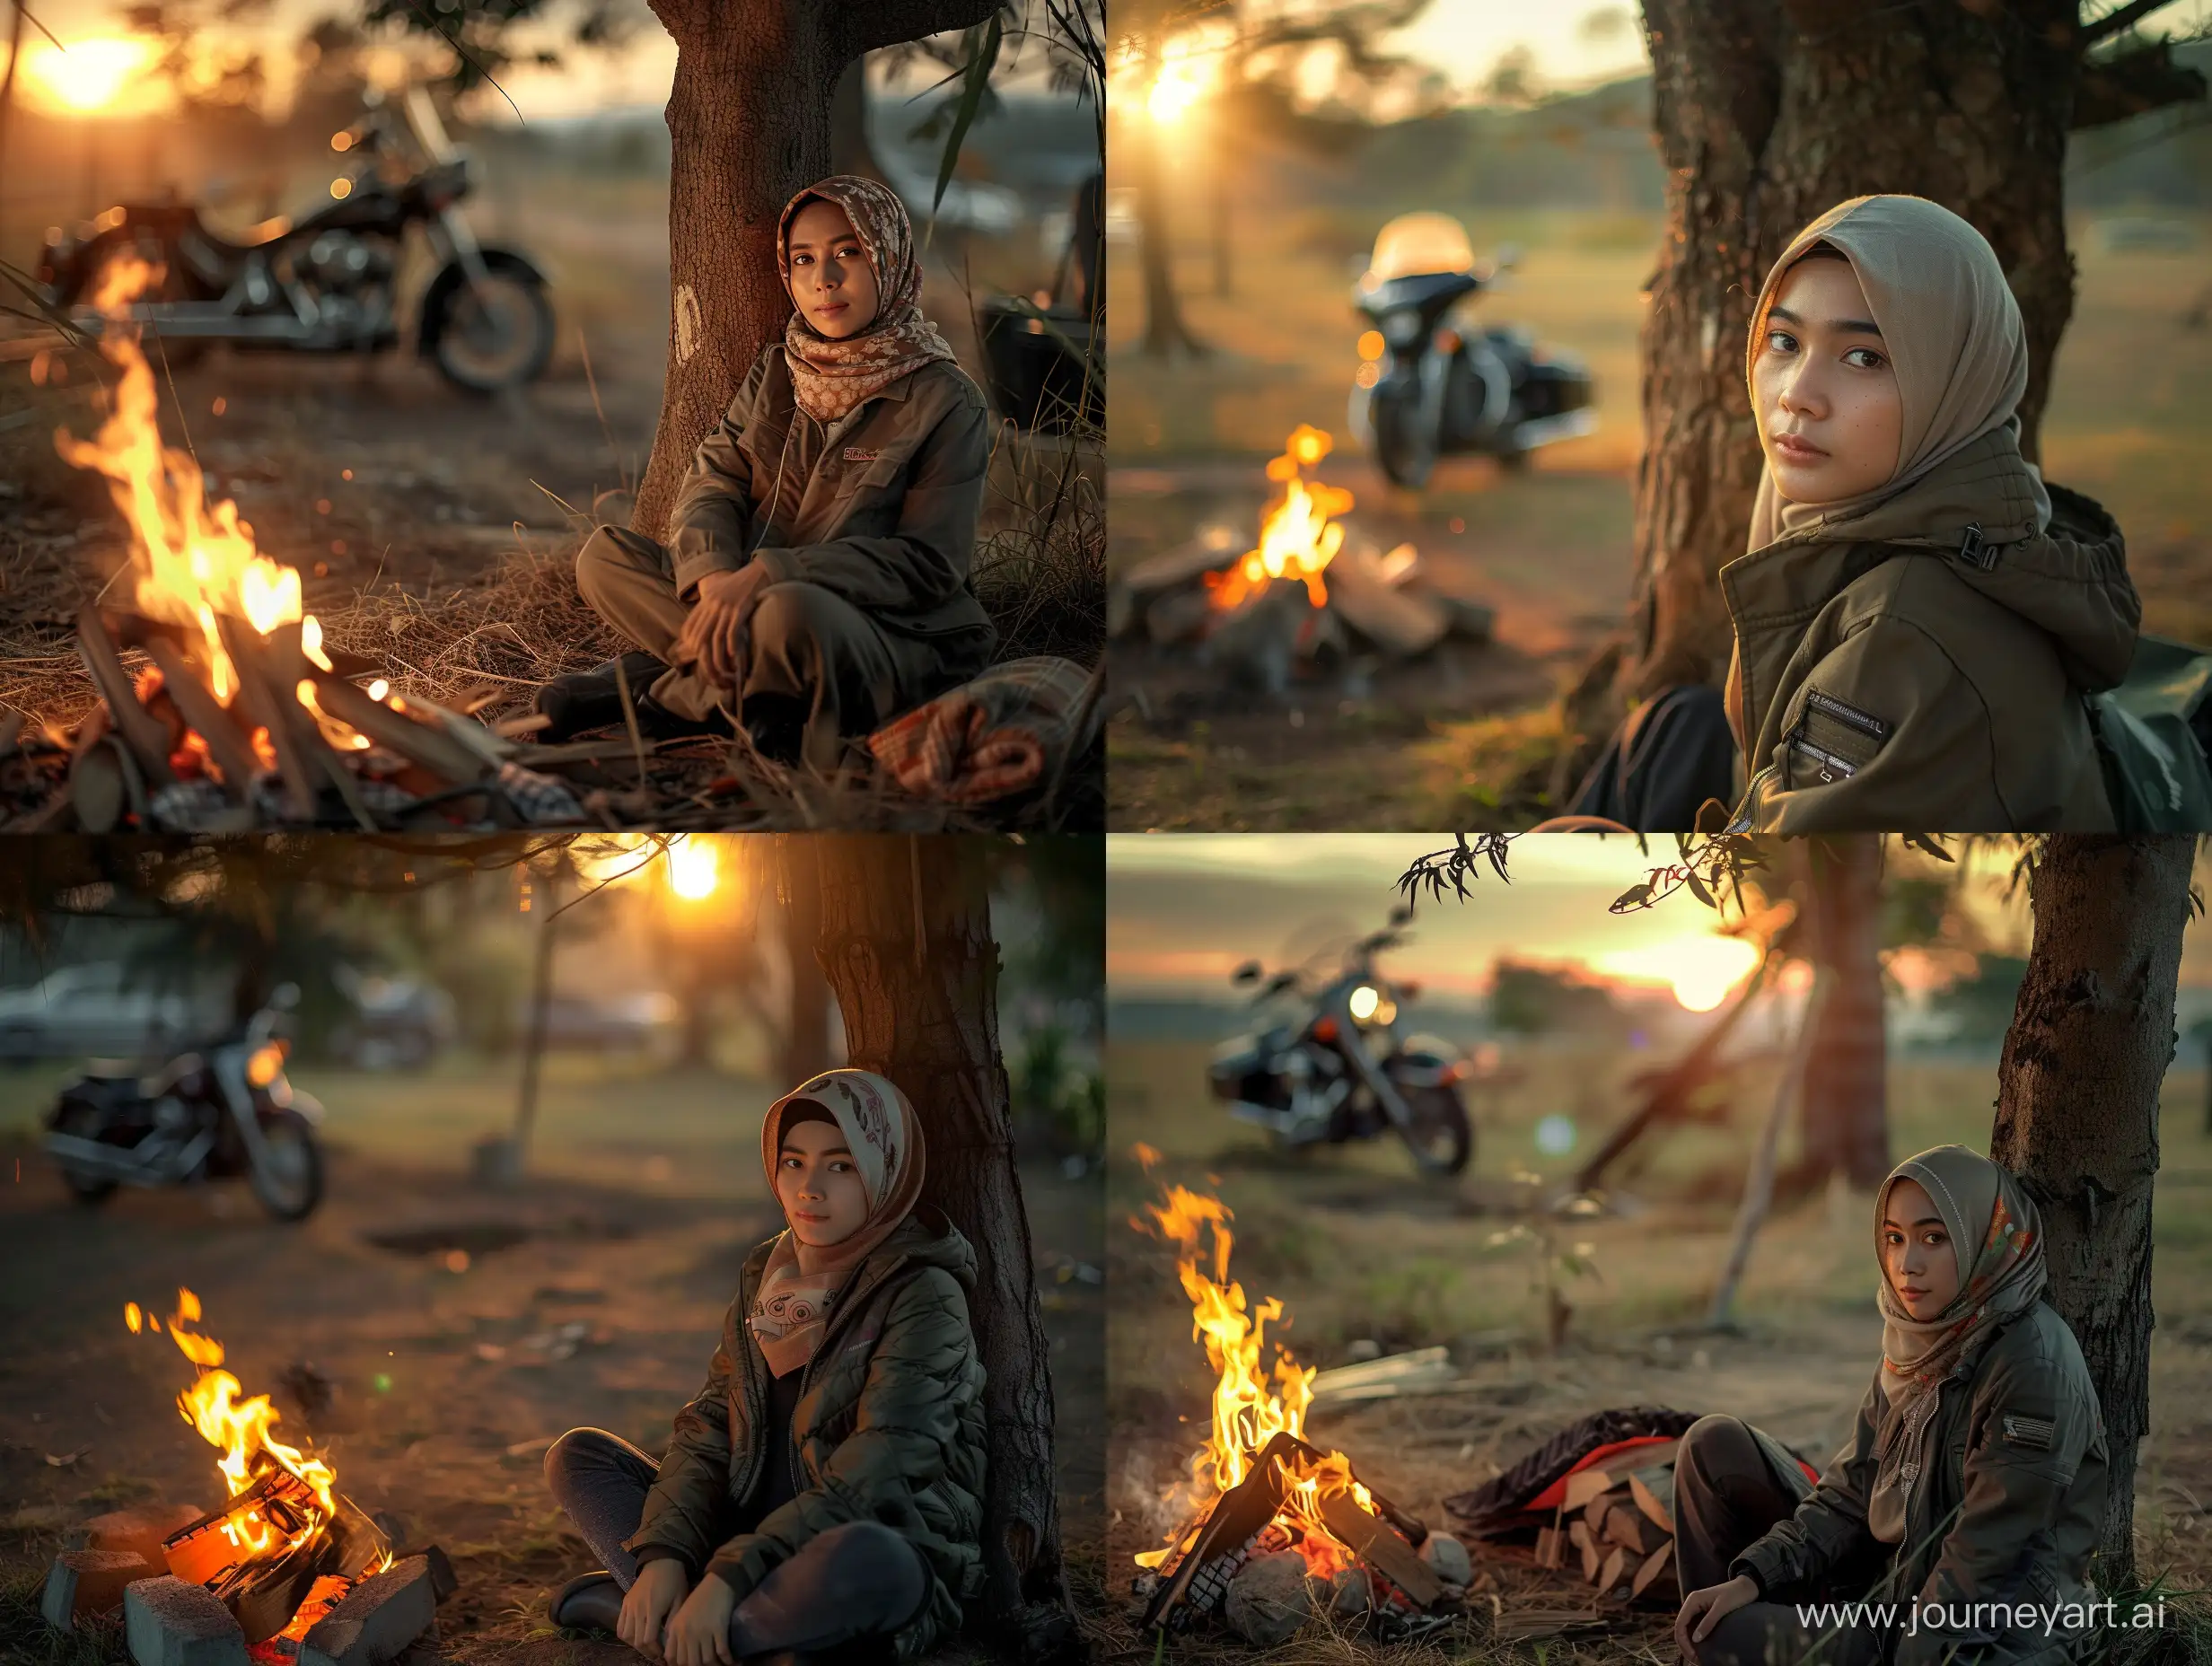 Indonesian-Javanese-Woman-Sitting-by-Campfire-at-Sunset-with-Harley-Motorbike